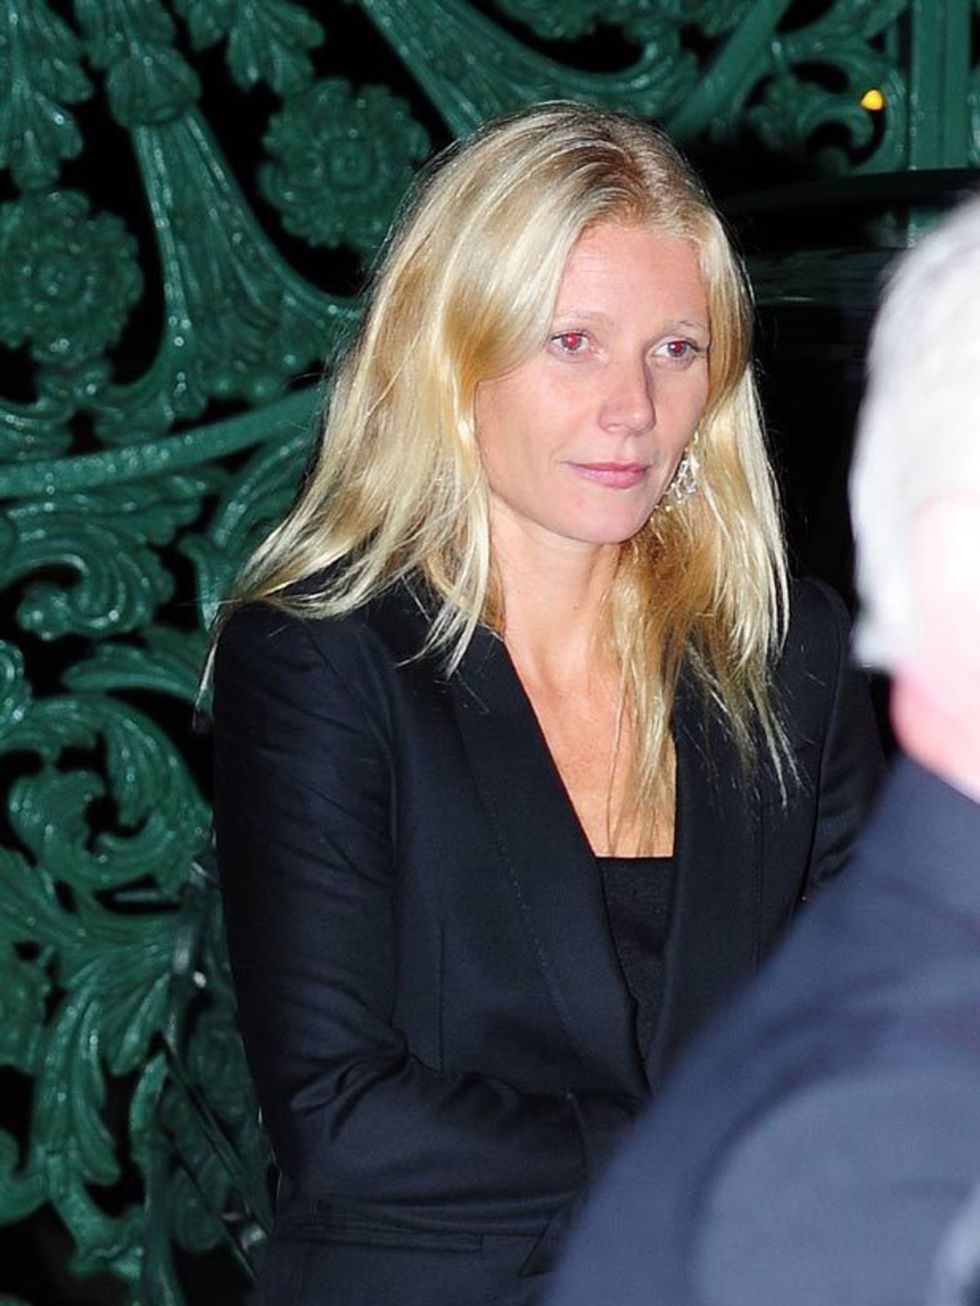 <p><a href="http://www.elleuk.com/starstyle/style-files/(section)/gwyneth-paltrow">Gwyneth Paltrow</a> channels this season's <a href="http://www.elleuk.com/style/trends/androgyny">androgyny</a> trend at Stella McCartney's 40th Birthday, 13 September 2011